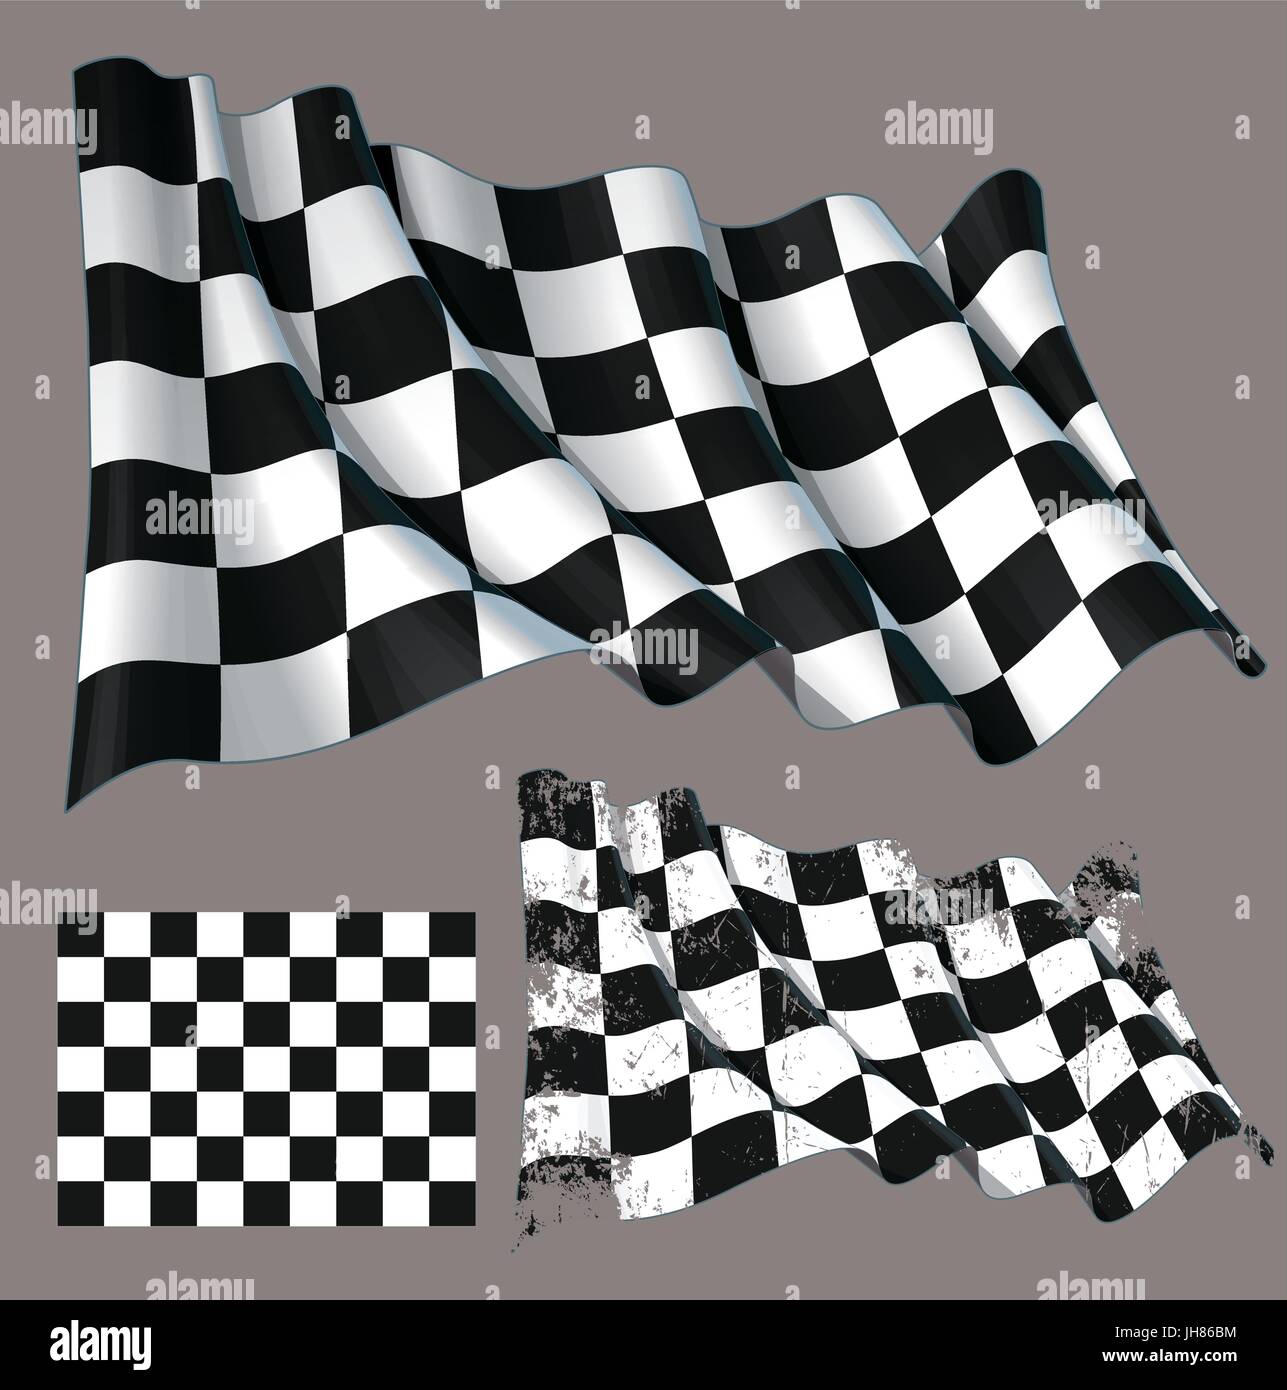 Chequered Flag Vector High Resolution Stock Photography and Images - Alamy Repeating Checkered Flag Background